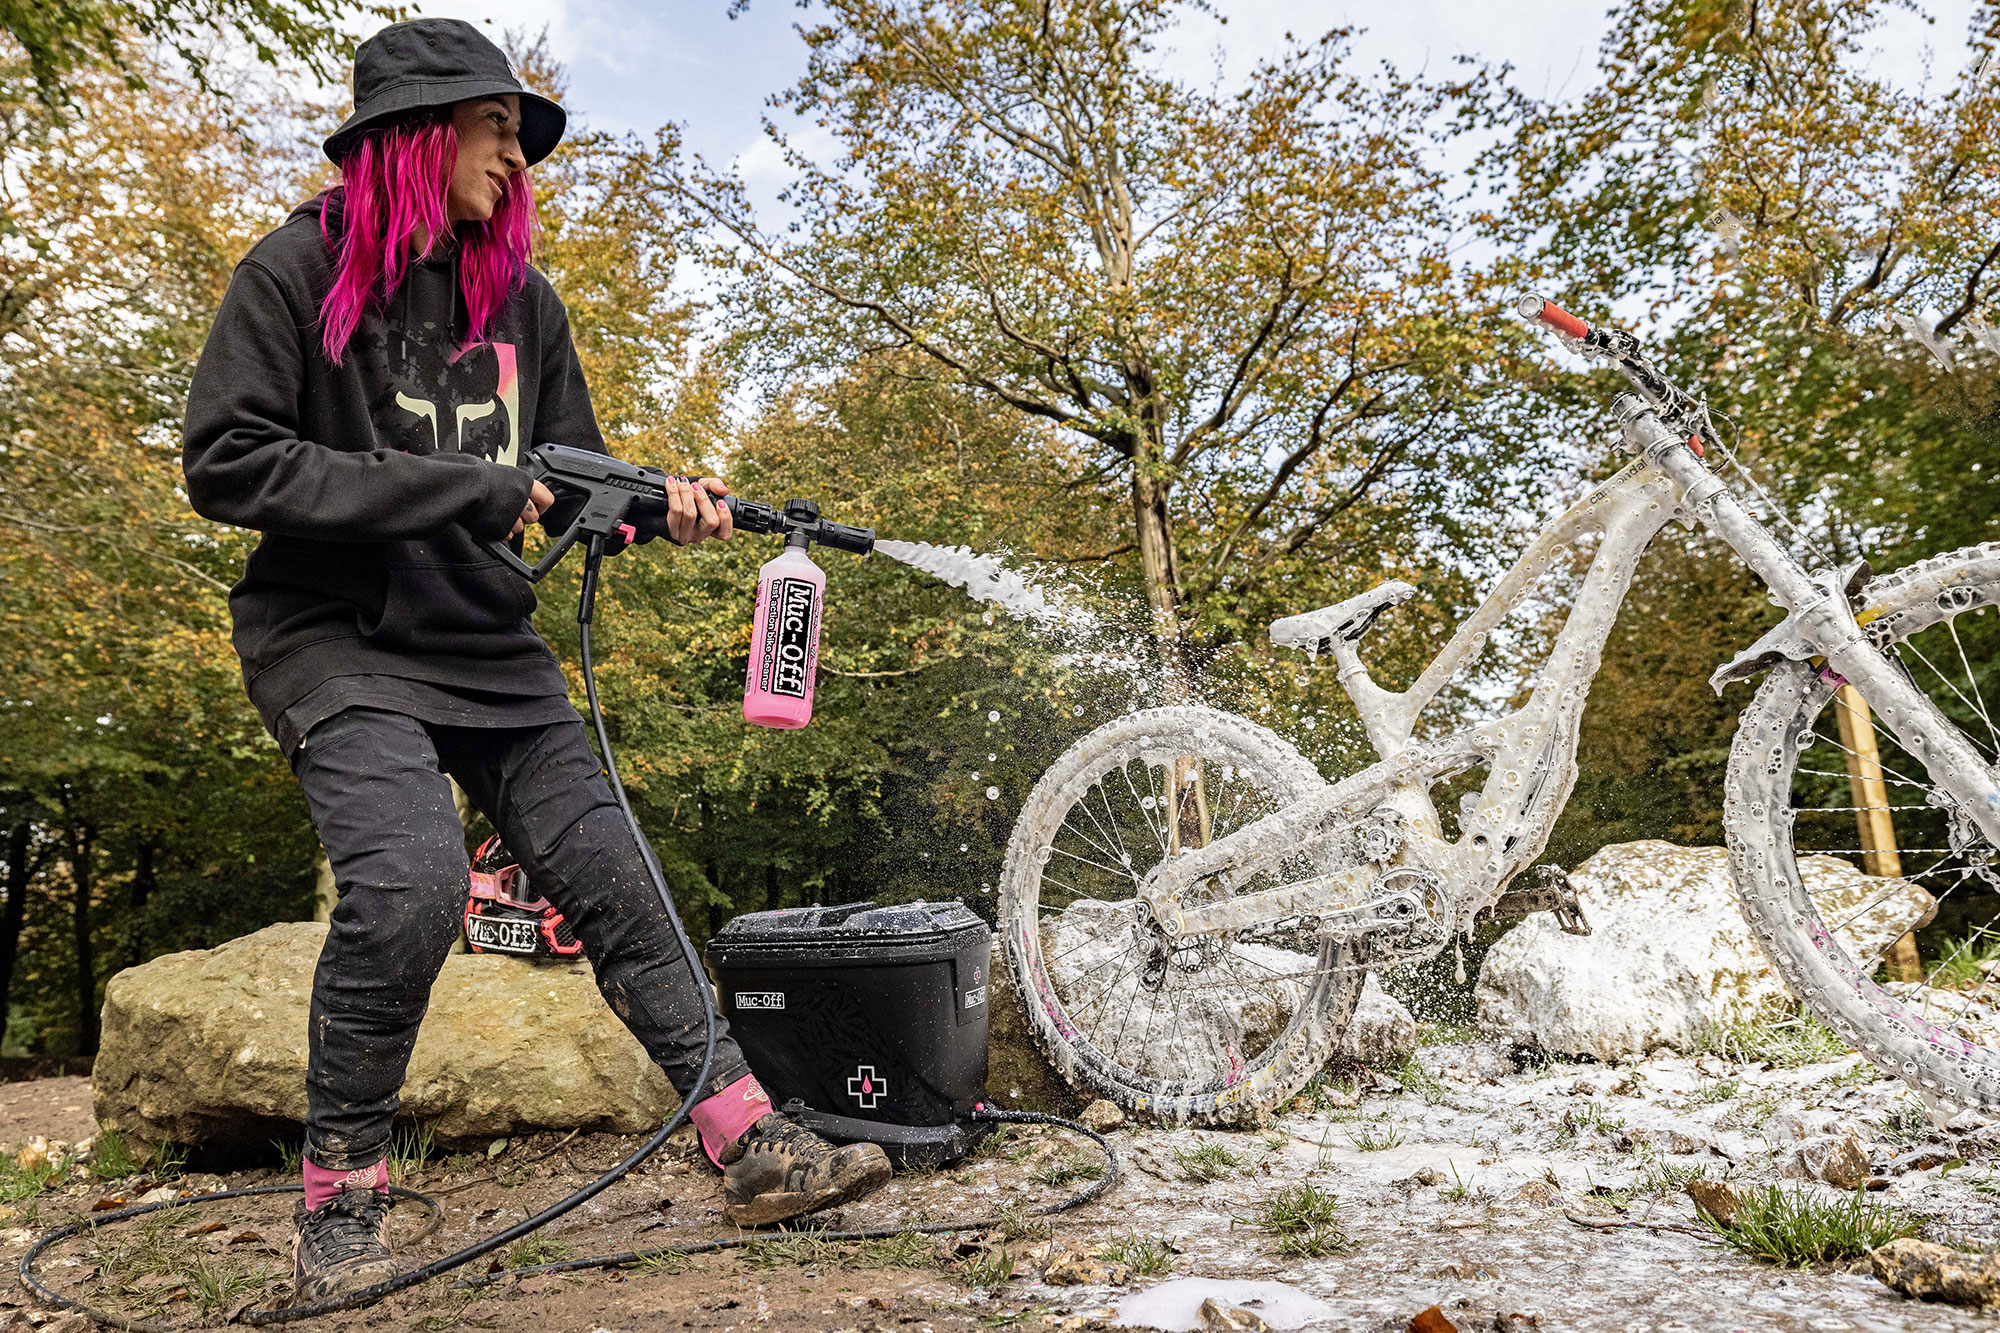 Muc-Off Pressure Washer Goes Mobile, Let Snow Foam Jet Wash Your Bike Anywhere